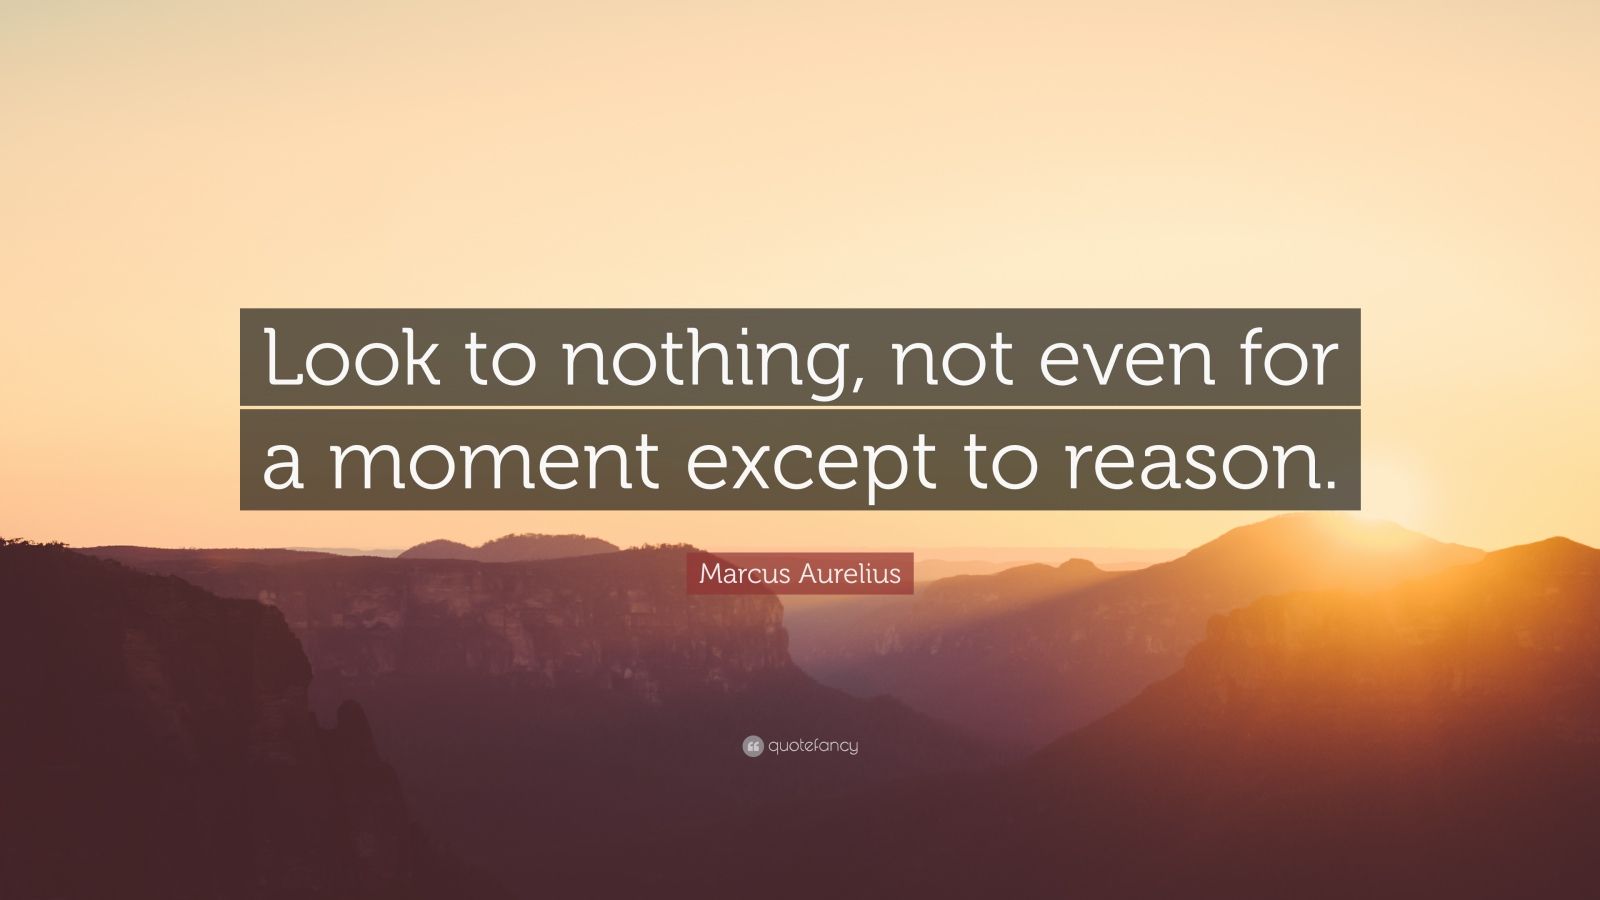 Marcus Aurelius Quote: “Look to nothing, not even for a moment except ...